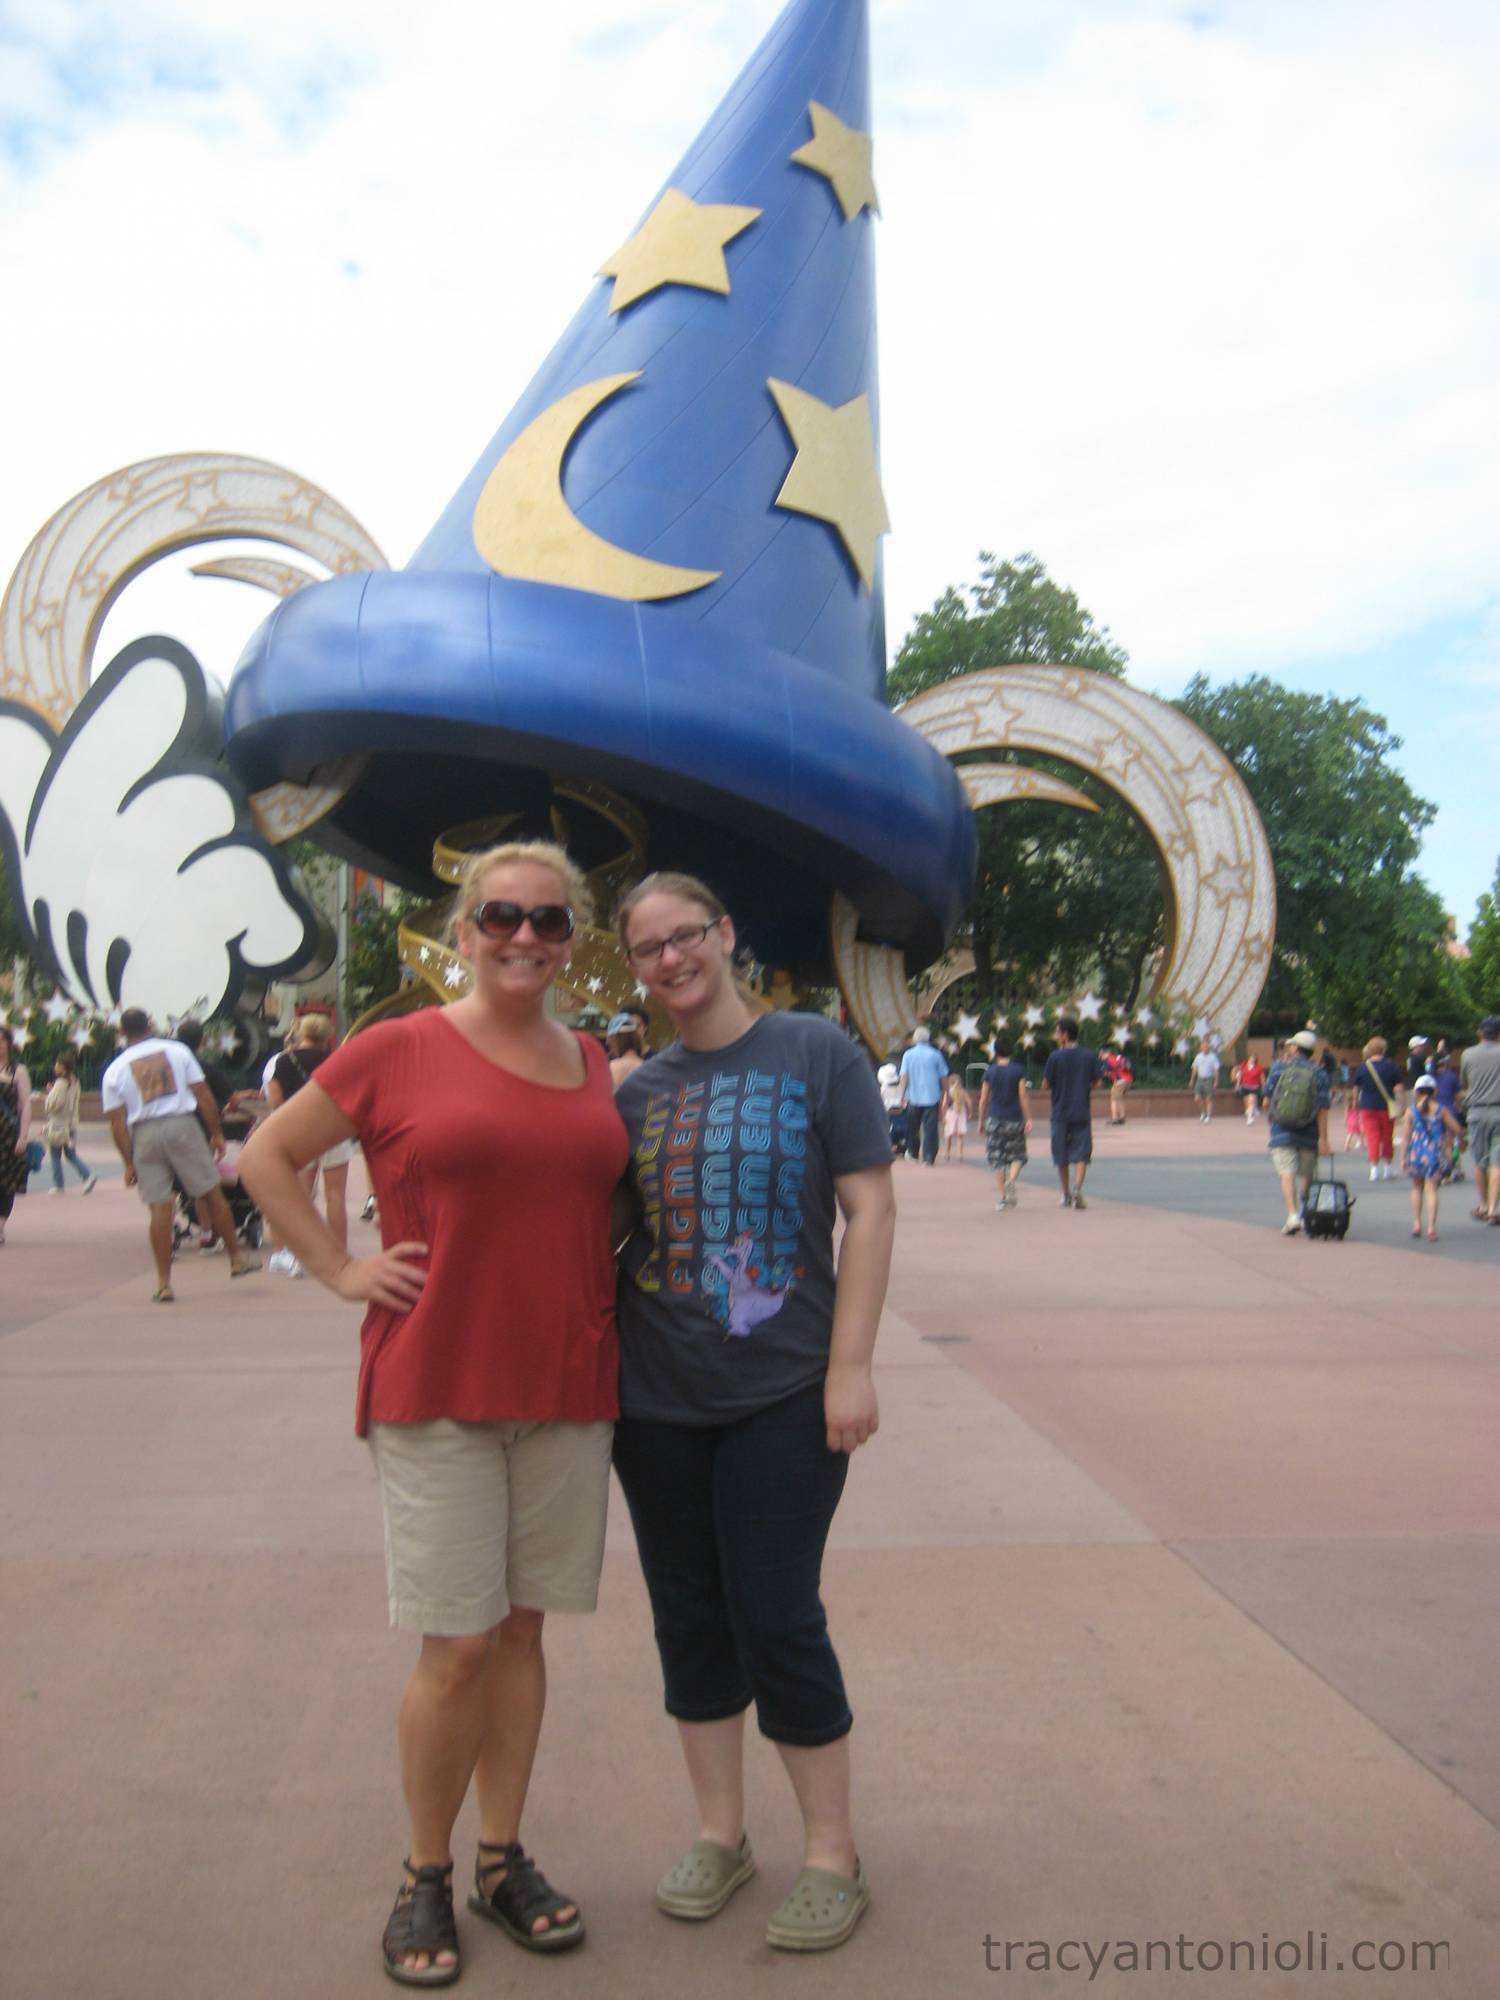 Learn more about Walt Disney World and yourself when you travel with a friend |PassPorter.com